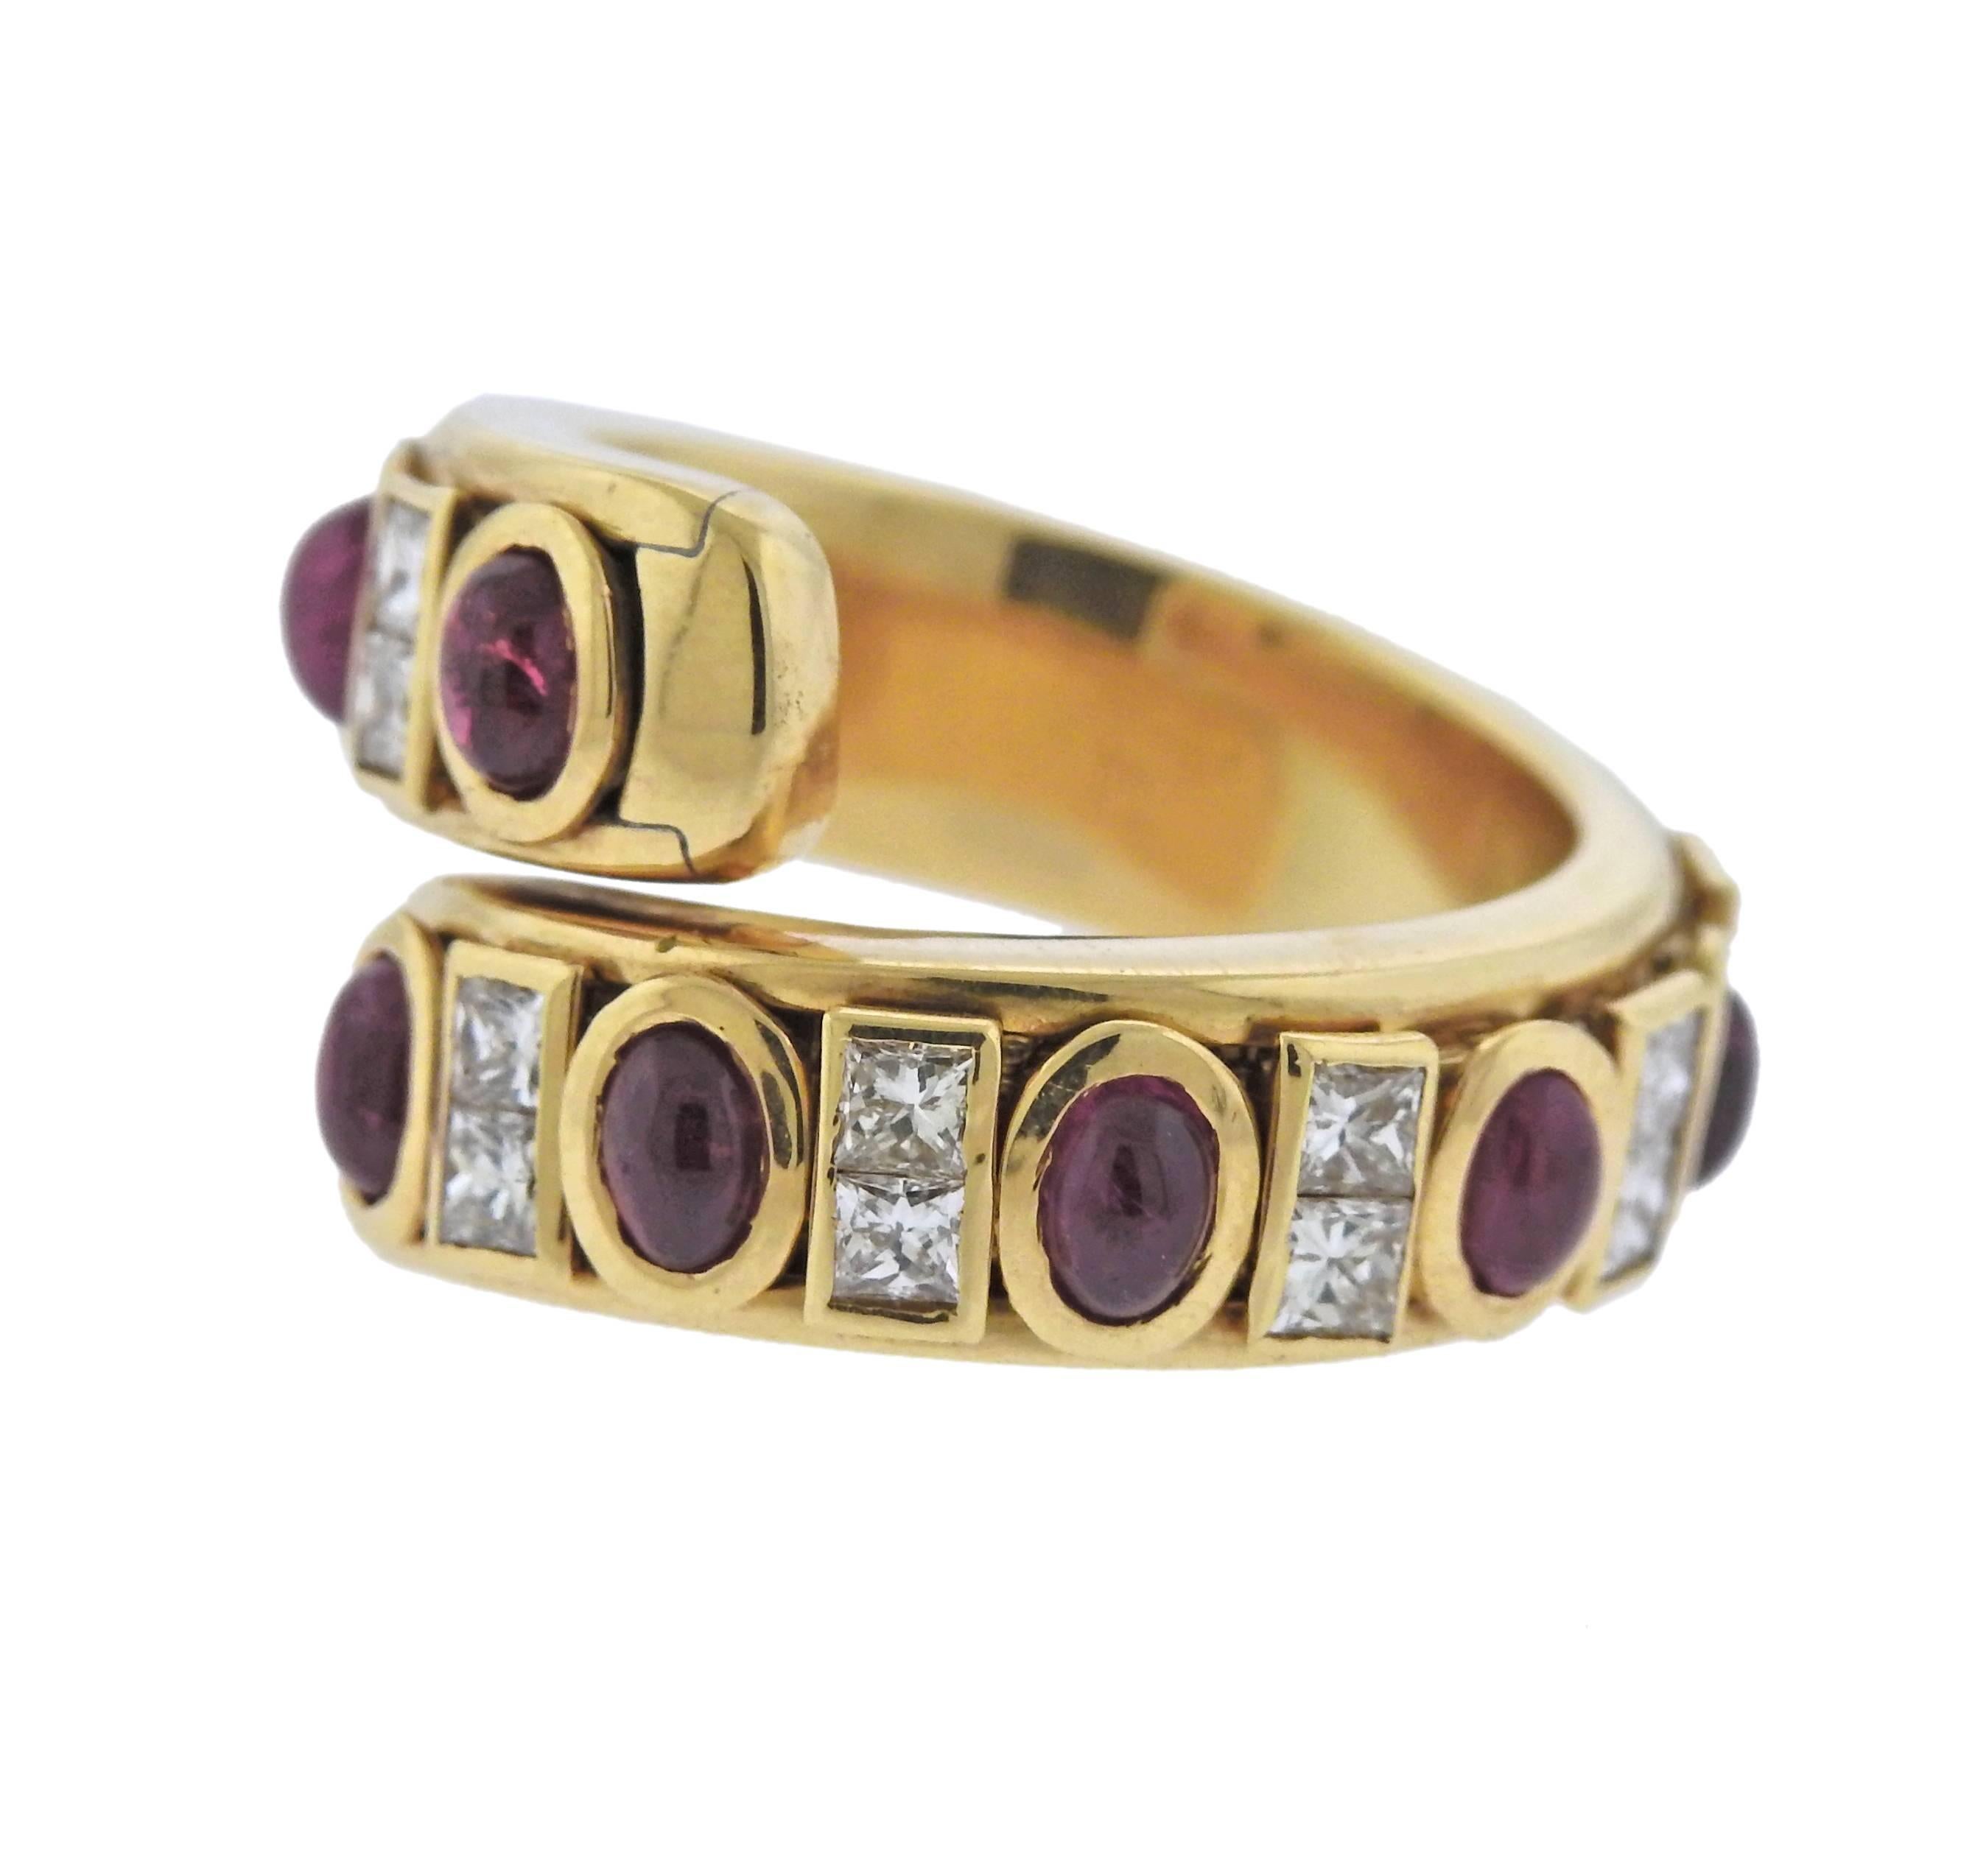 18k yellow gold bypass ring, crafted by Verney Paris, decorated with approx. 1.00ctw in diamonds and rubies. Ring size - 6, ring top is 14mm wide, weighs 13.1 grams. 